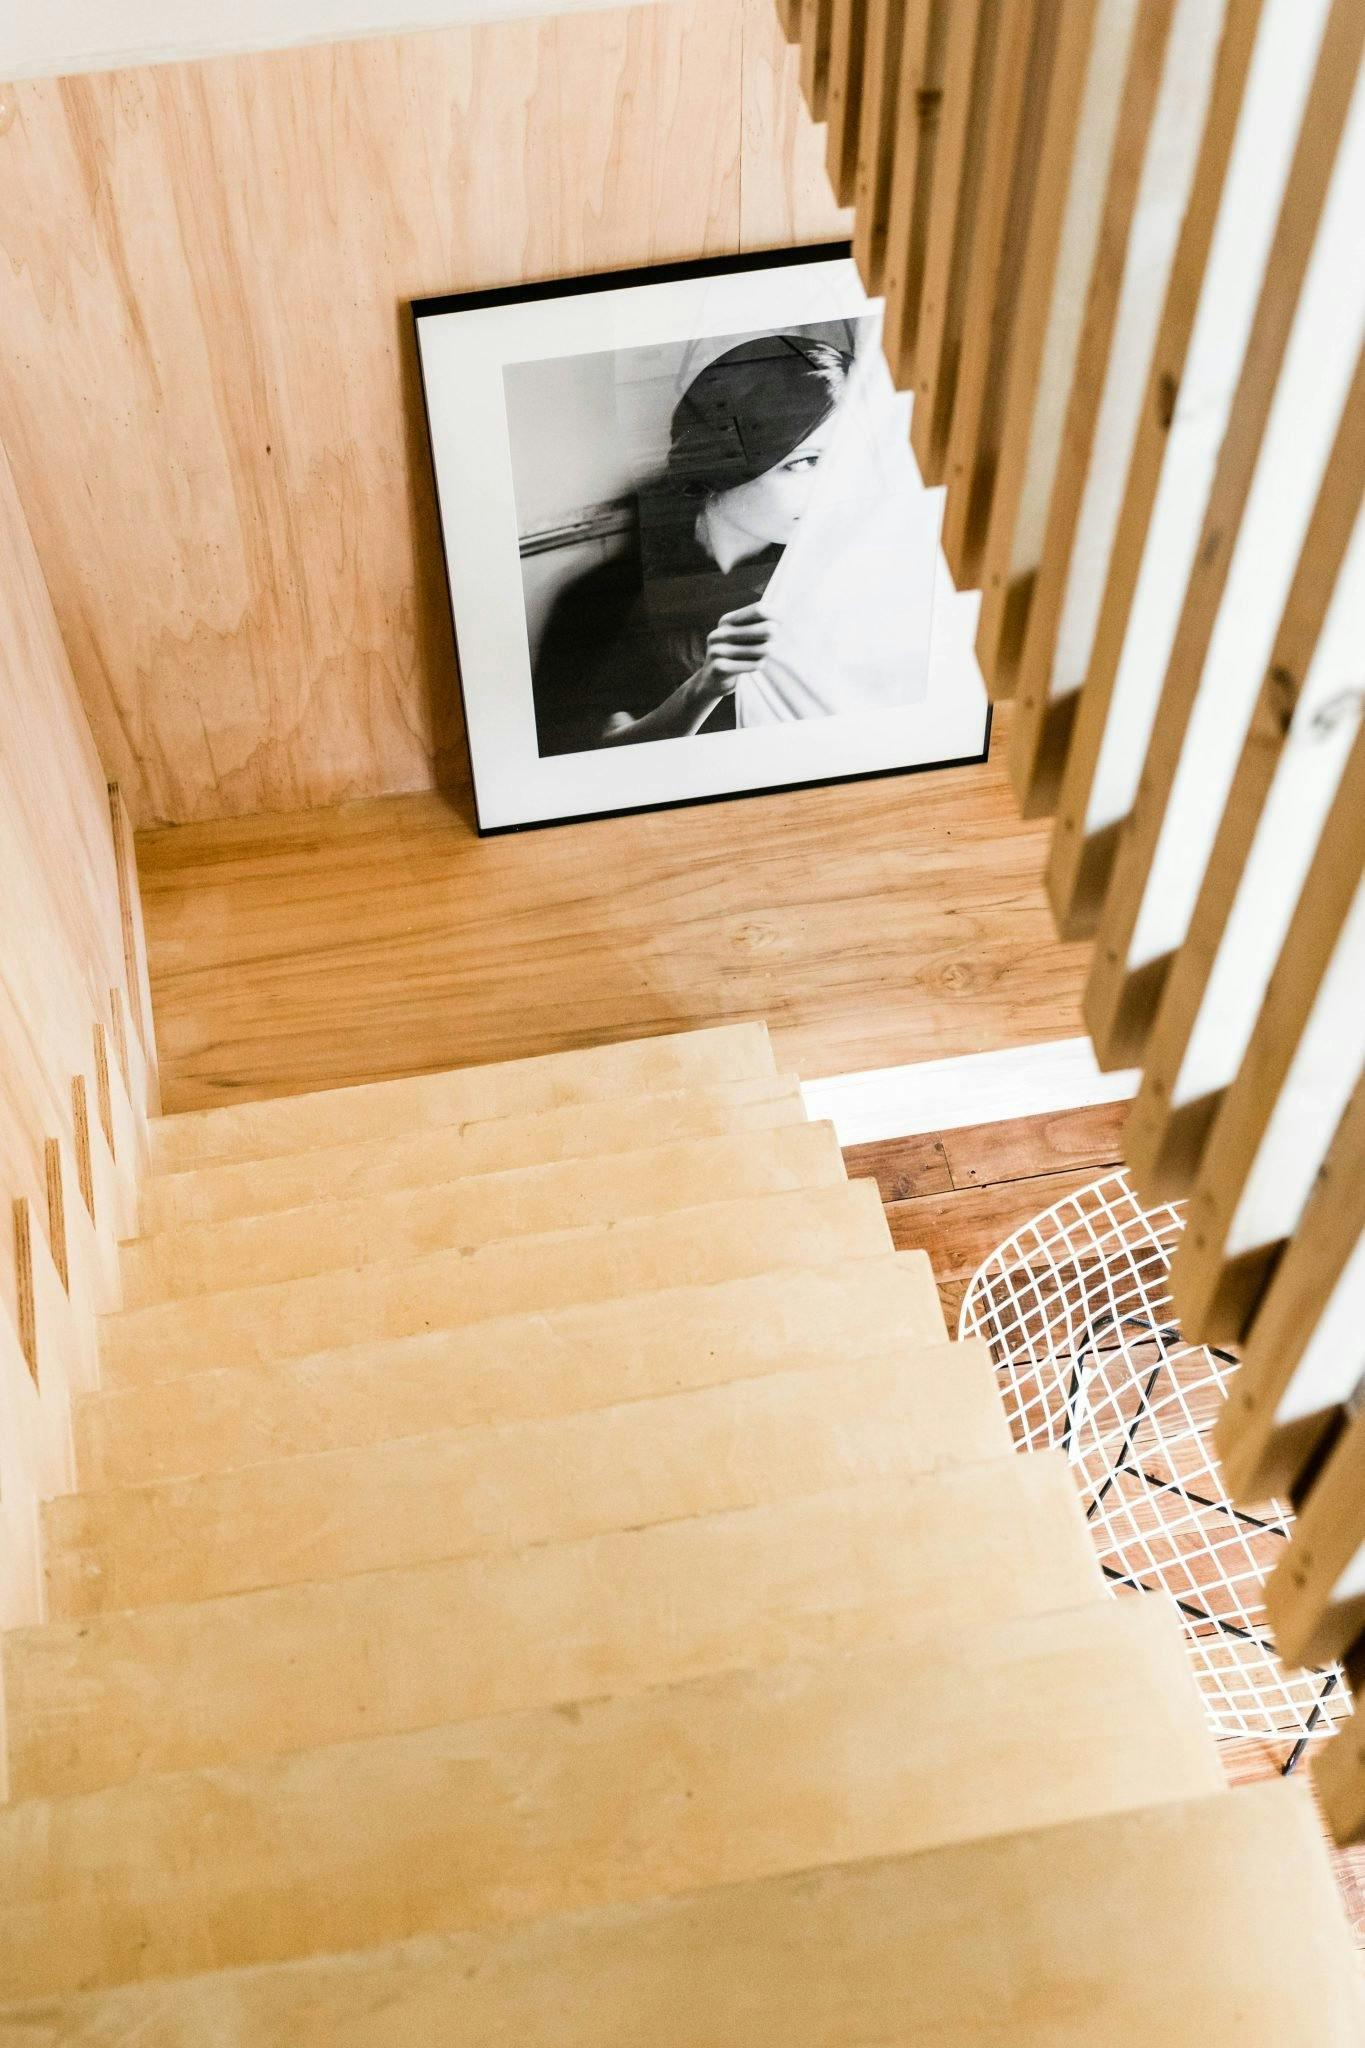 The stairs from upstairs